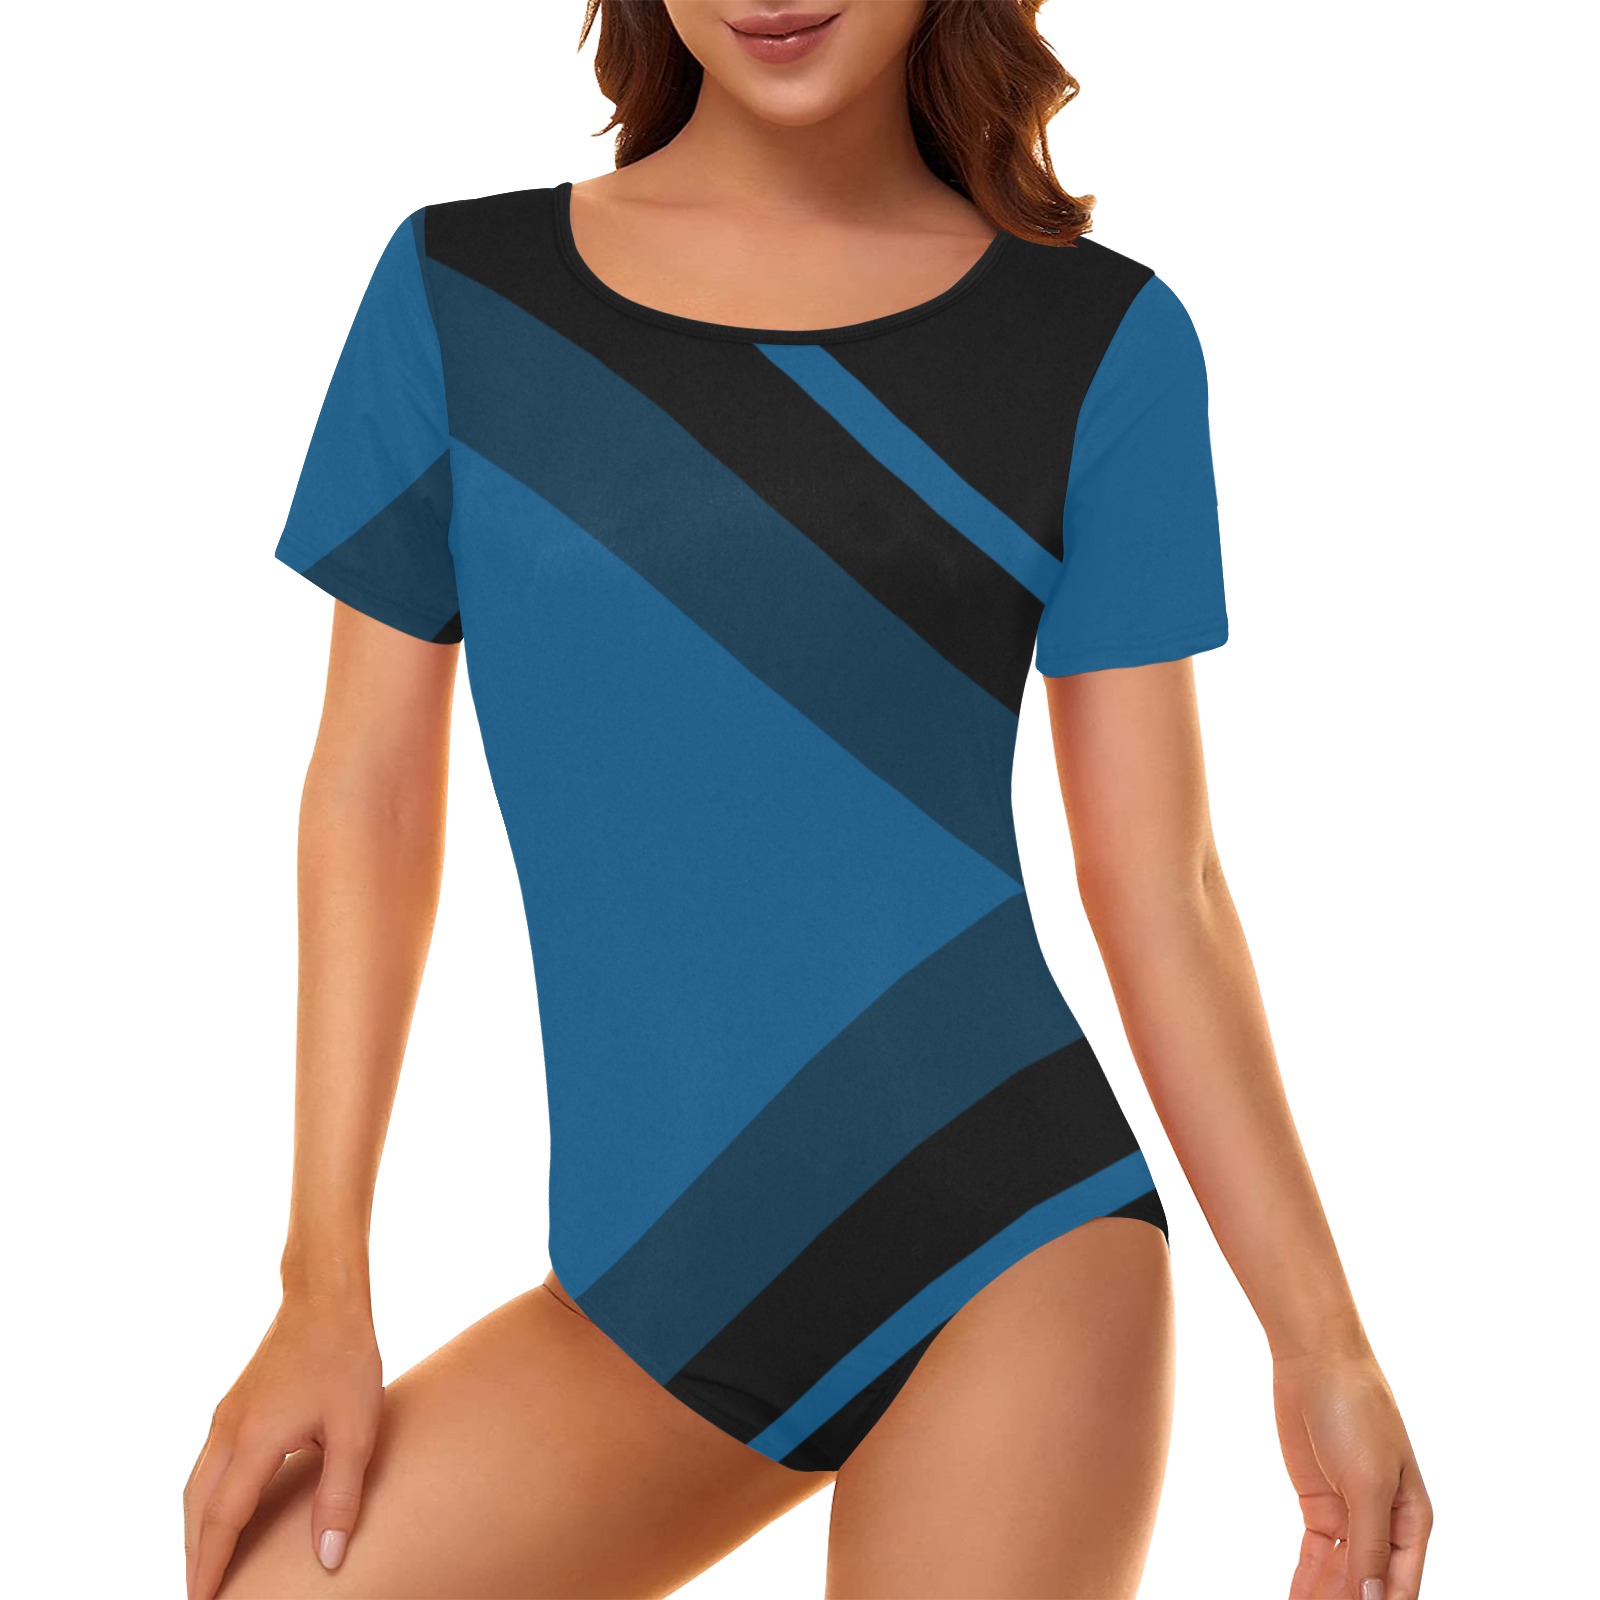 Classic Blue Layers With Black Women's Short Sleeve Bodysuit